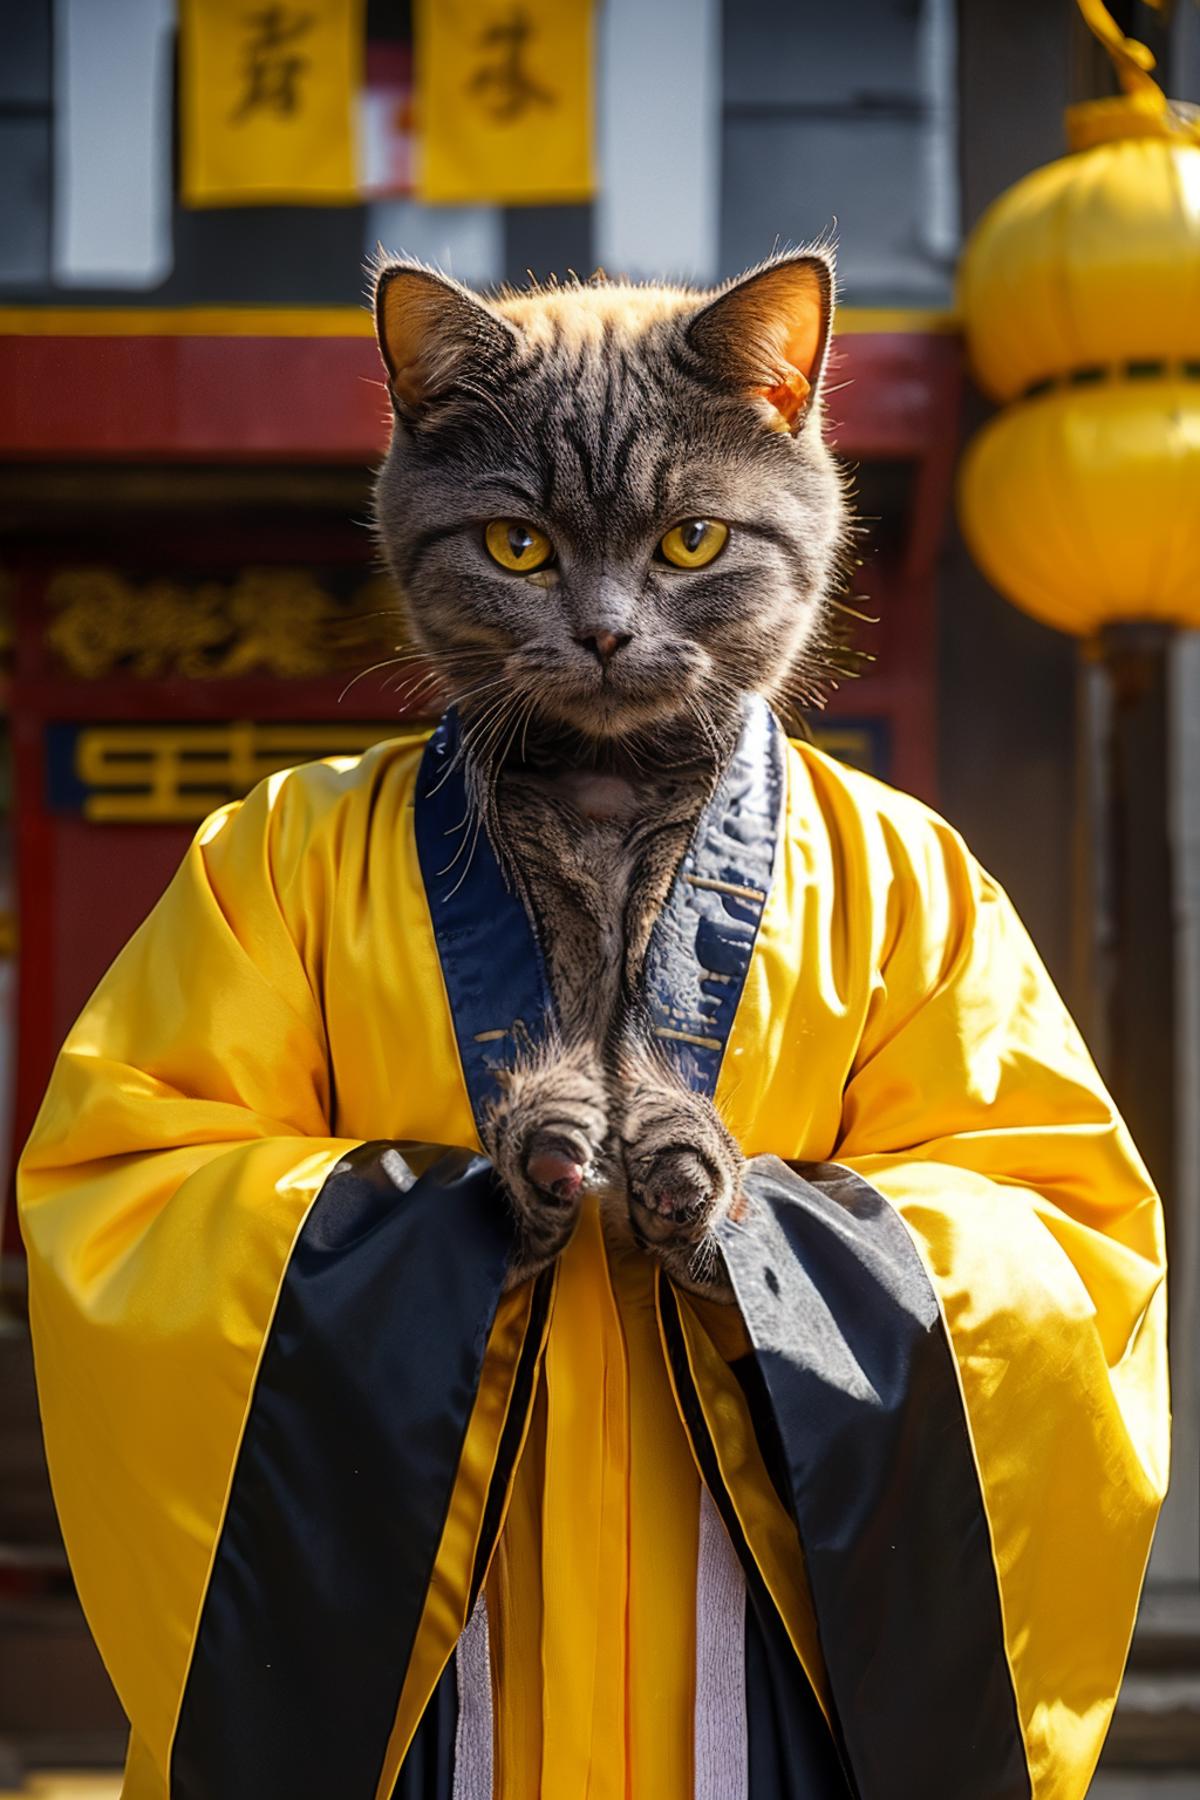 A cat dressed in a yellow robe with a paw under its chin.